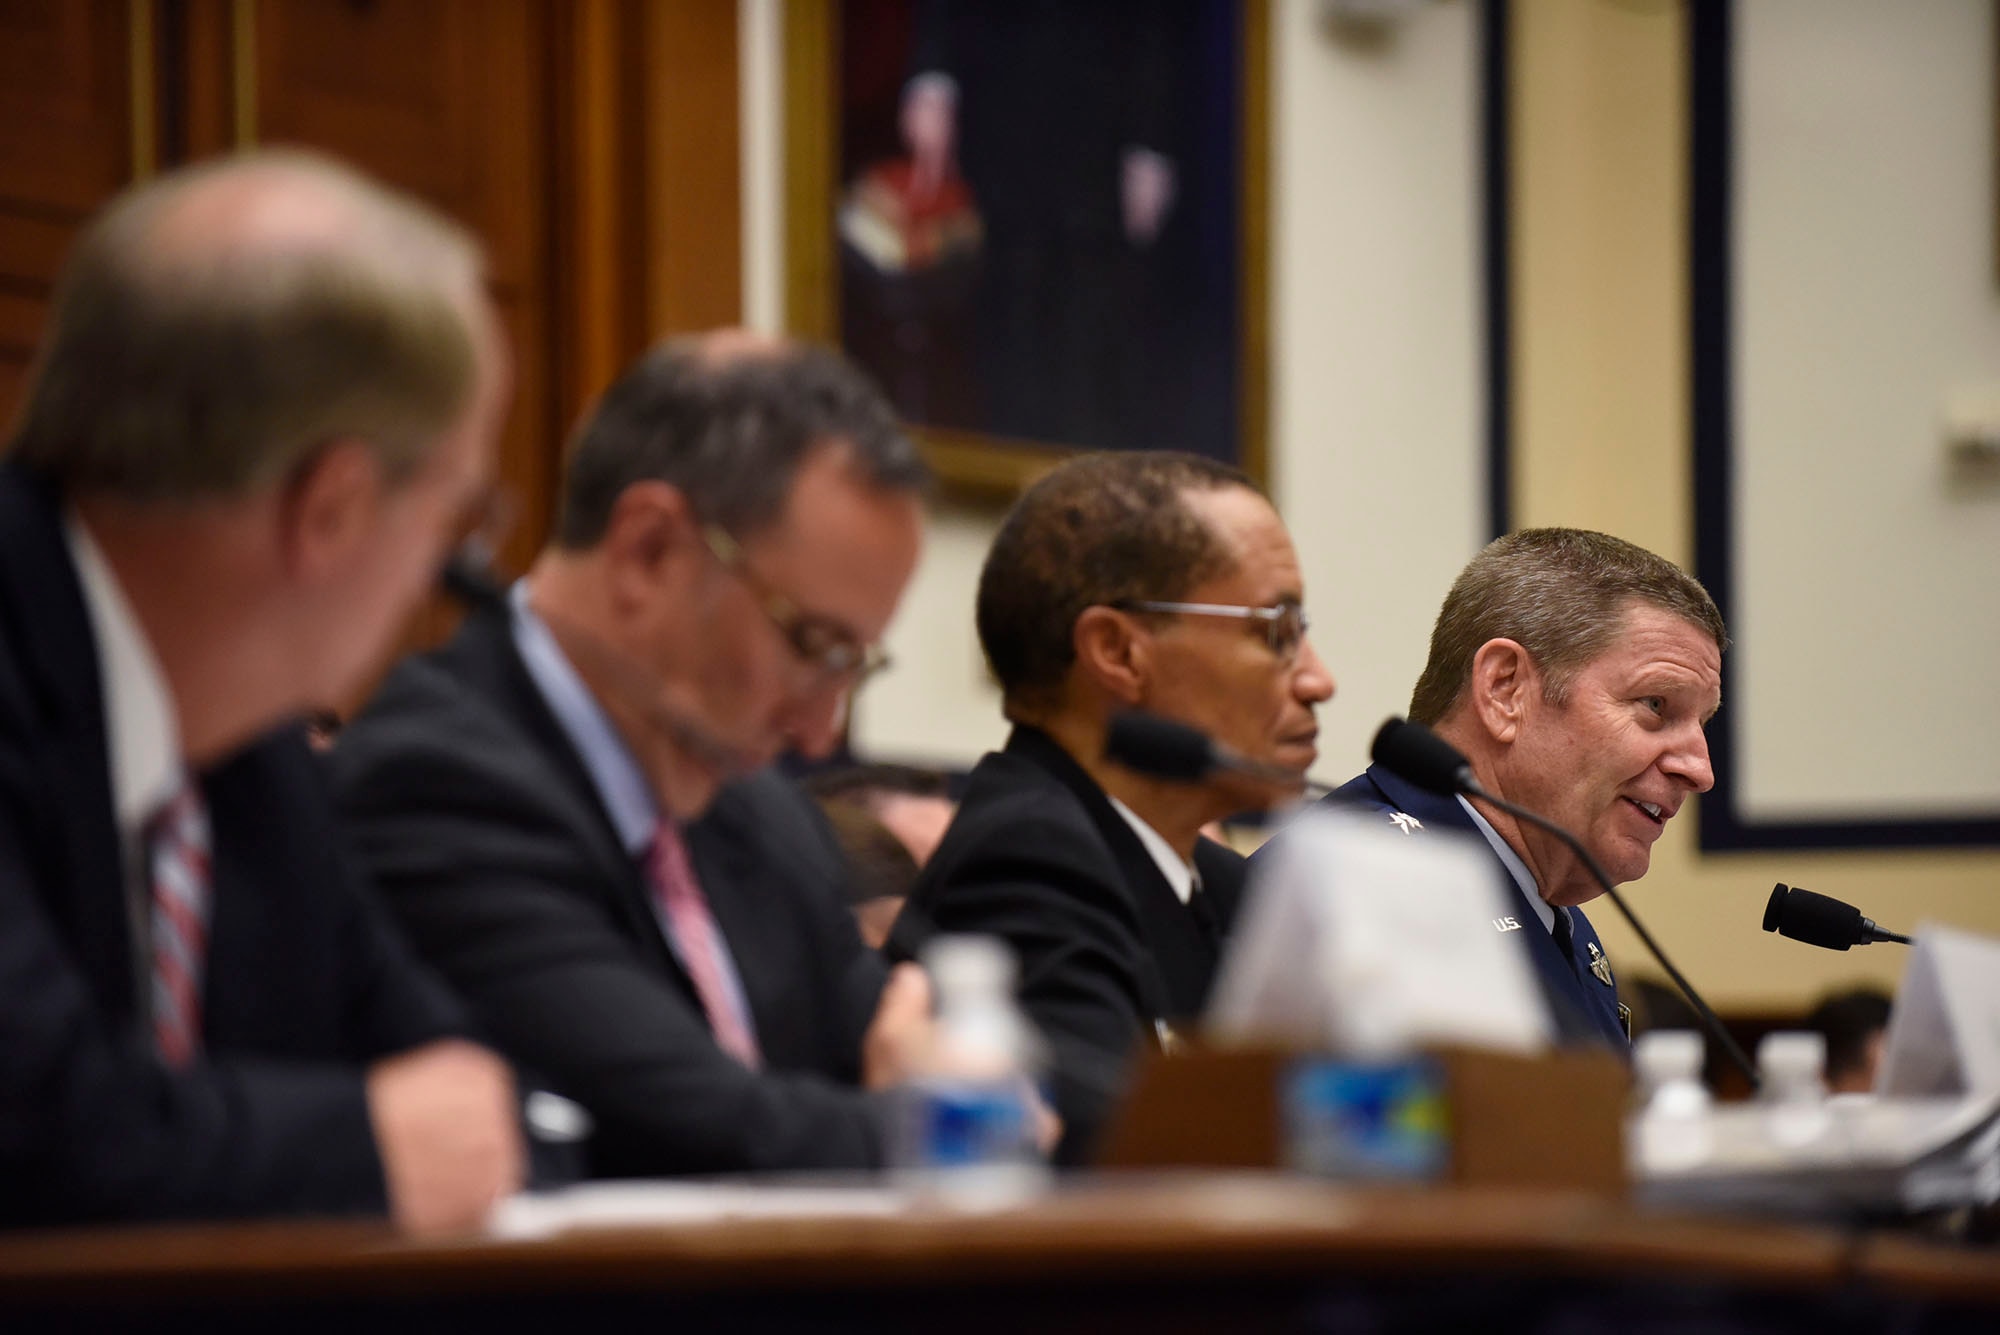 Gen. Robin Rand, commander of Air Force Global Strike Command, testifies during a House Armed Services Strategic Forces Subcommittee hearing in Washington, D.C., July 14, 2016. In his testimony, Rand stressed the need to modernize and recapitalize the bomber and ICBM legs of the U.S. nuclear triad in order to protect weapons system reliability and their survivability in anti-access, area denial environments. (U.S. Air Force photo/Senior Airman Hailey Haux)